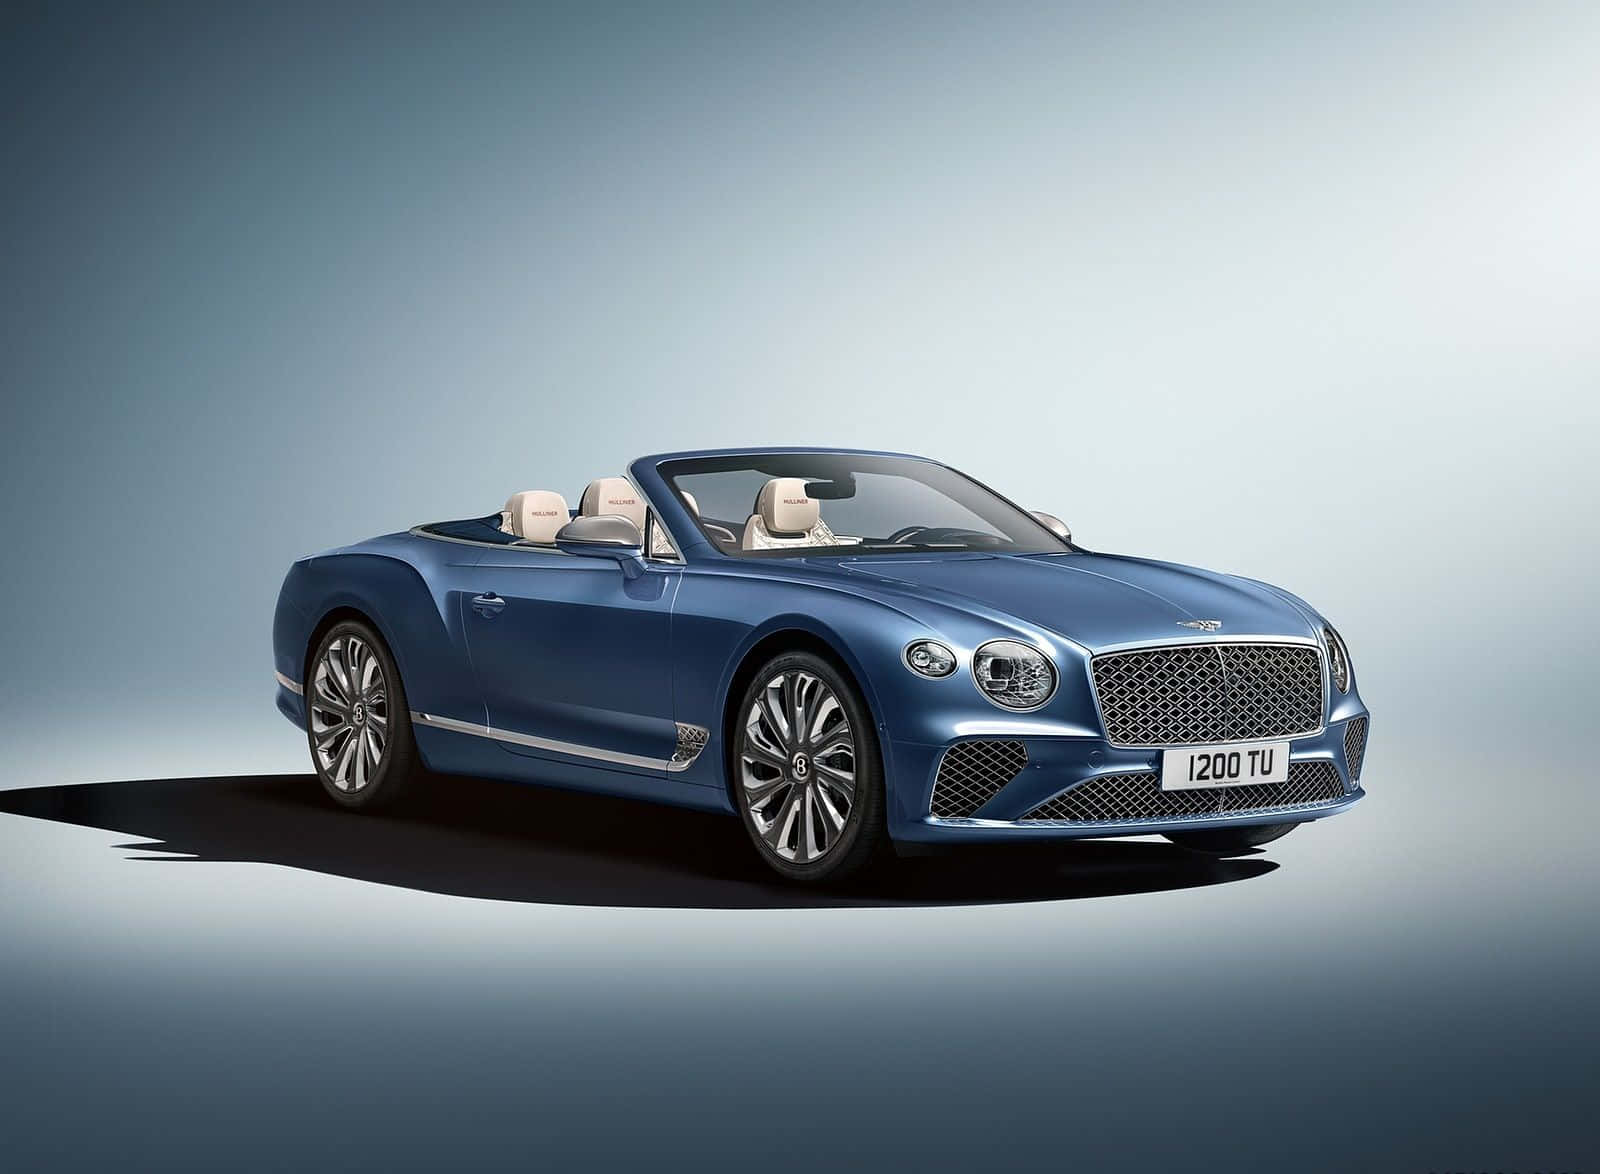 Experience luxury and speed with the iconic Bentley